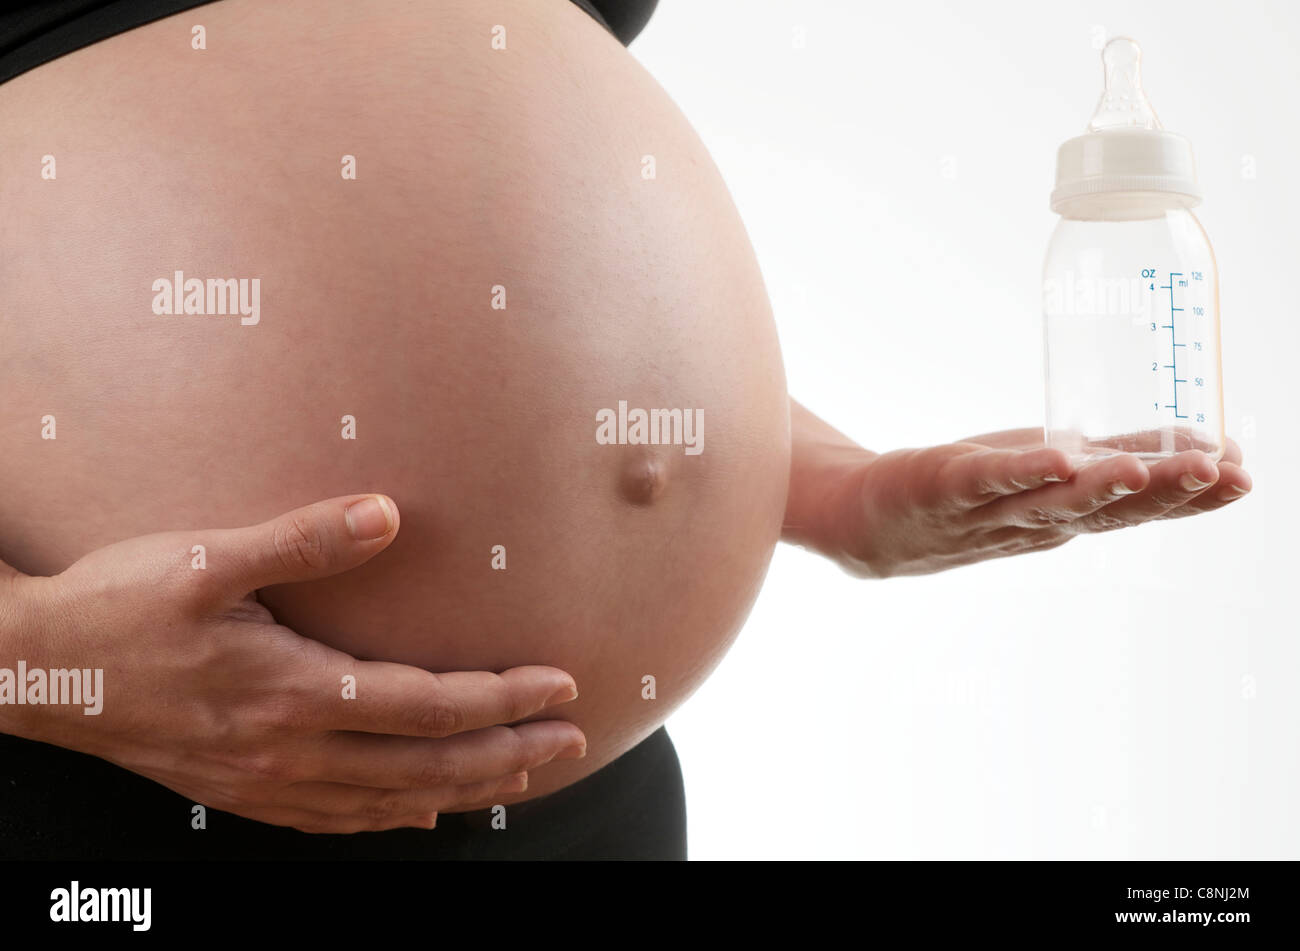 pregnant woman caressing her belly and holding a bottle Stock Photo